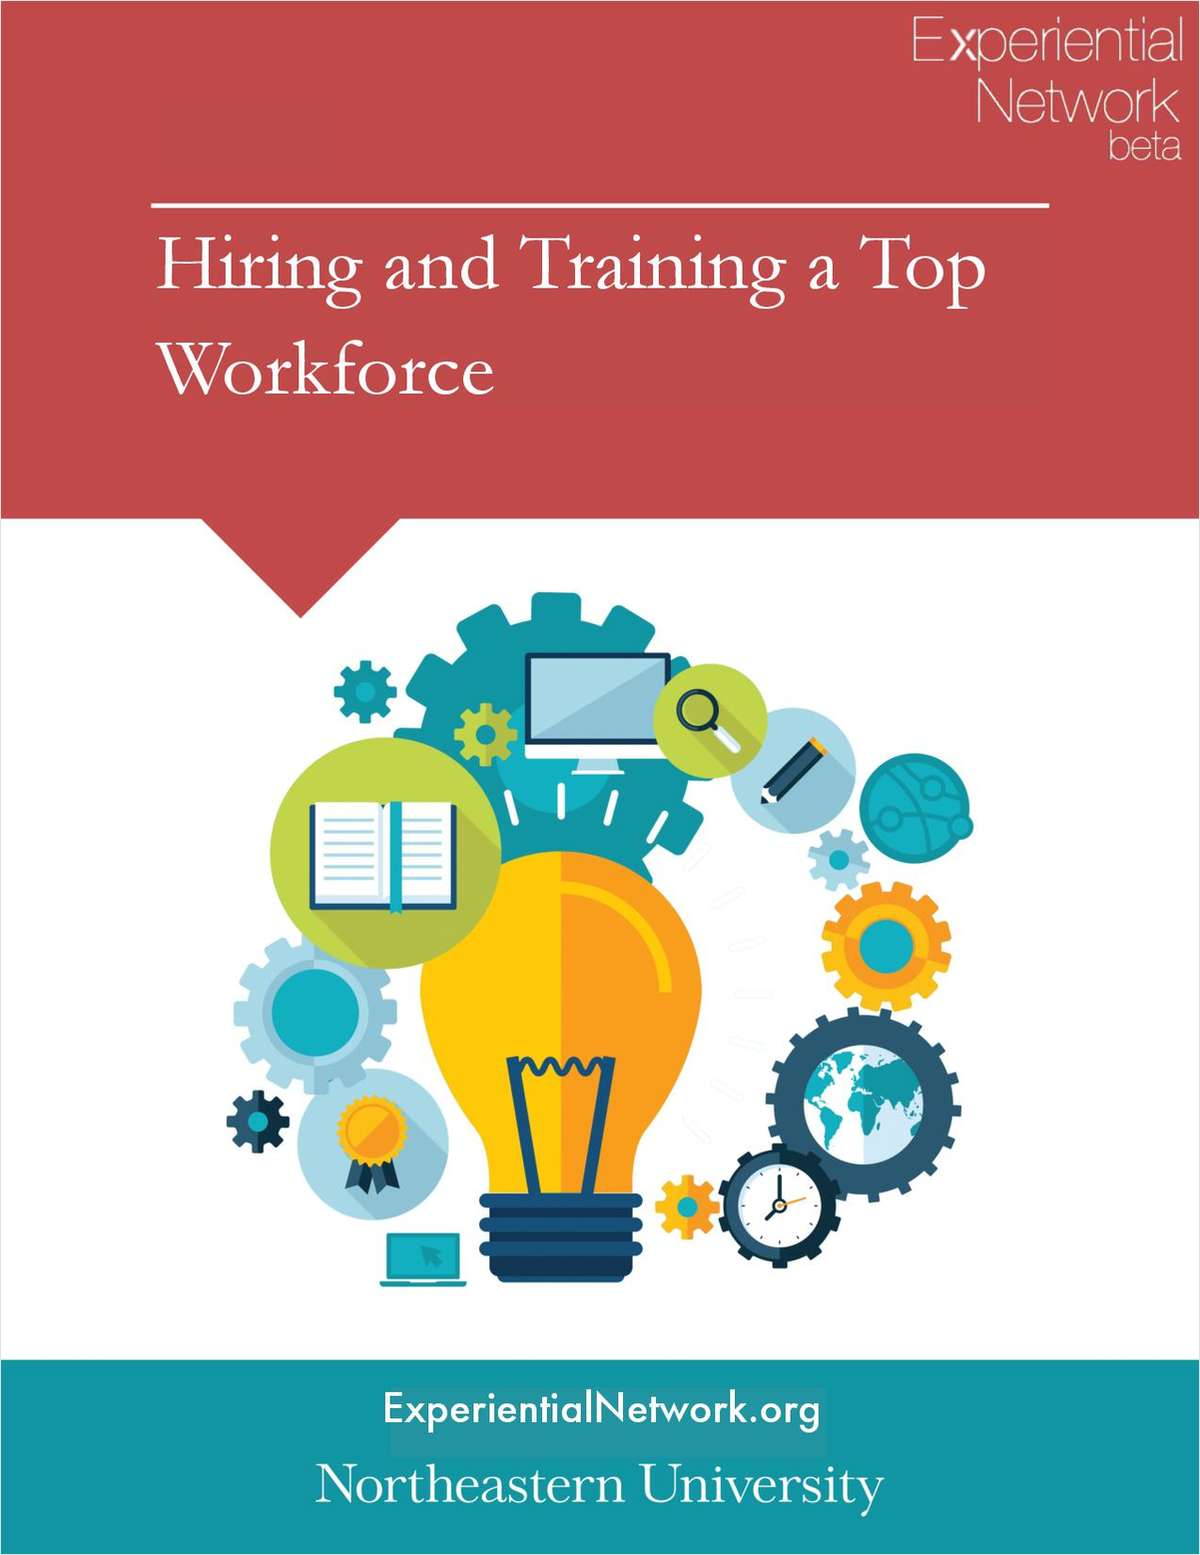 How to Hire, Train, and Develop a Top Talent Workforce